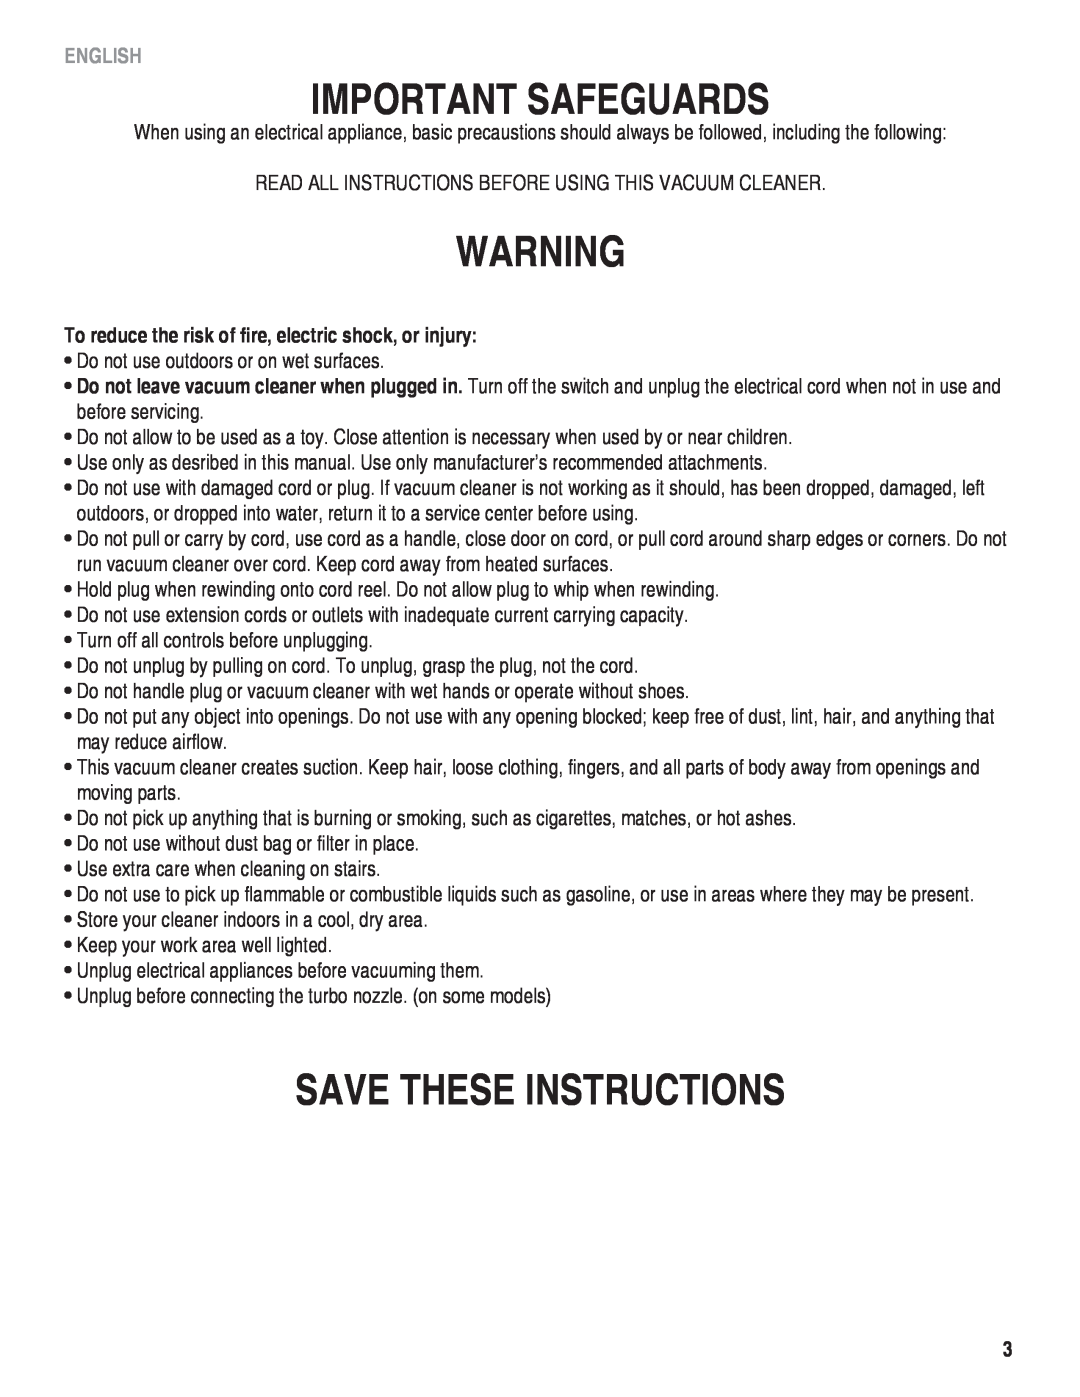 Eureka! Tents 980 manual Important Safeguards, Save These Instructions, English 